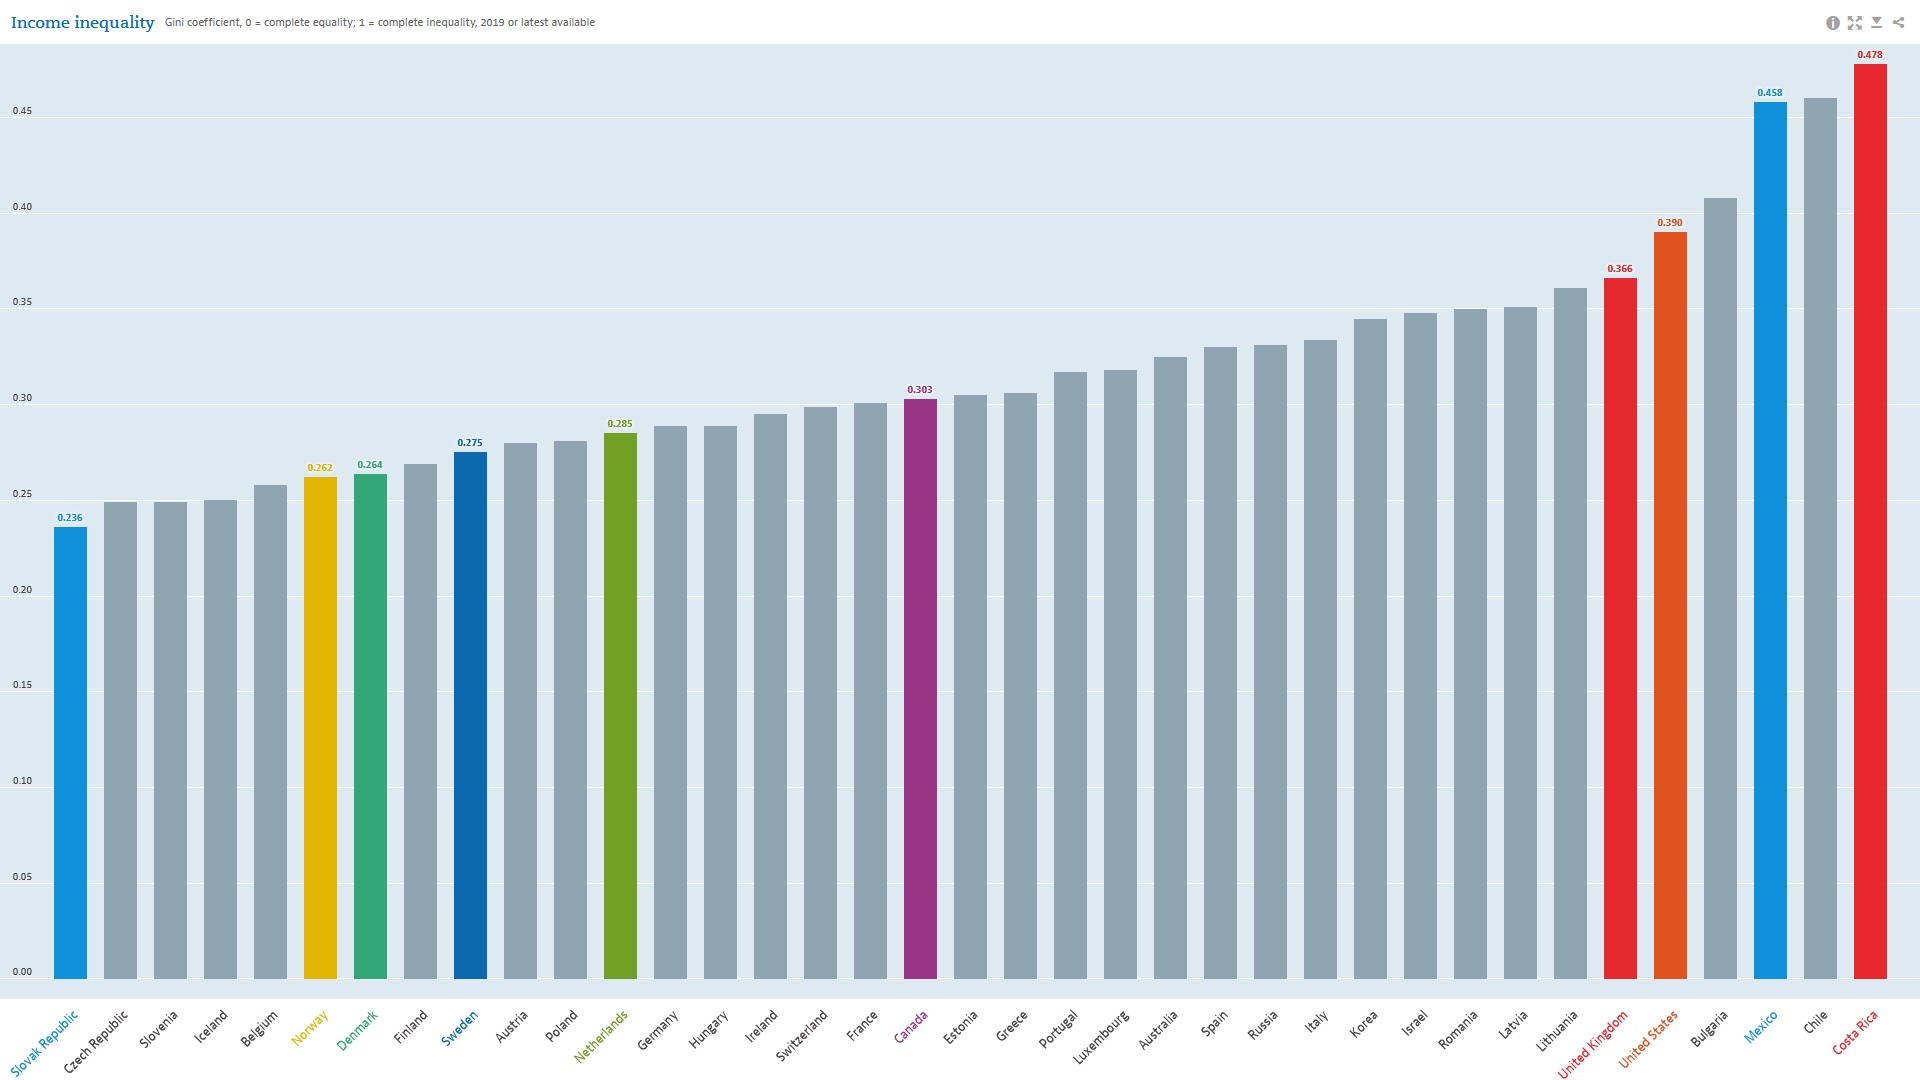 Gini Coefficients of Income Concentration in 37 OECD Countries